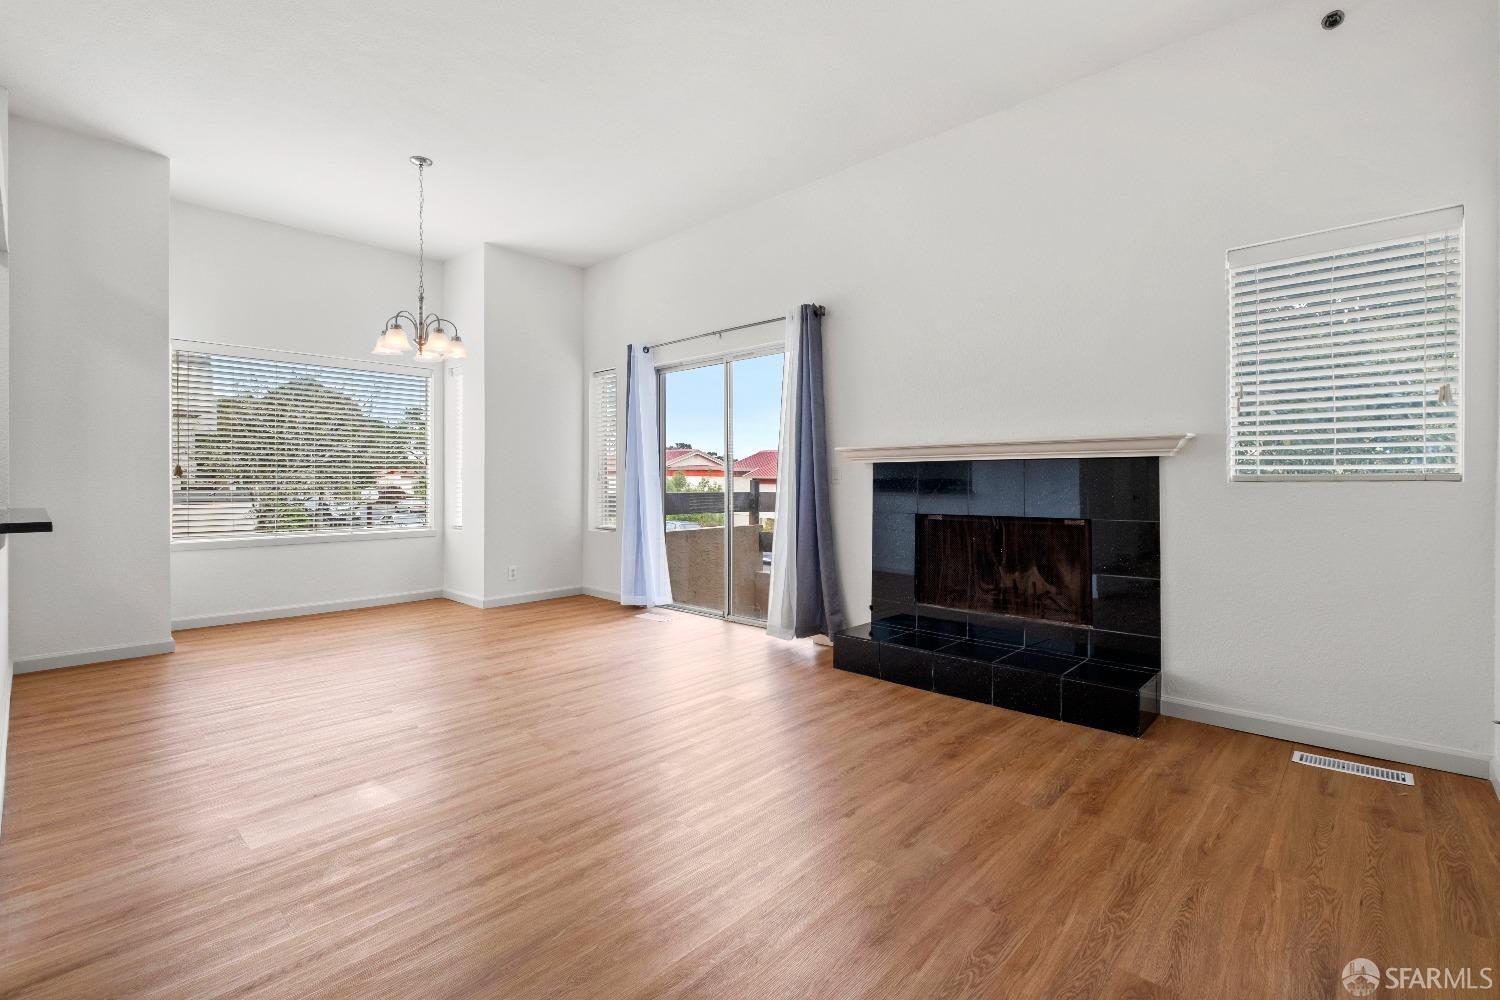 Photo of 3550 Carter Dr #83 in South San Francisco, CA